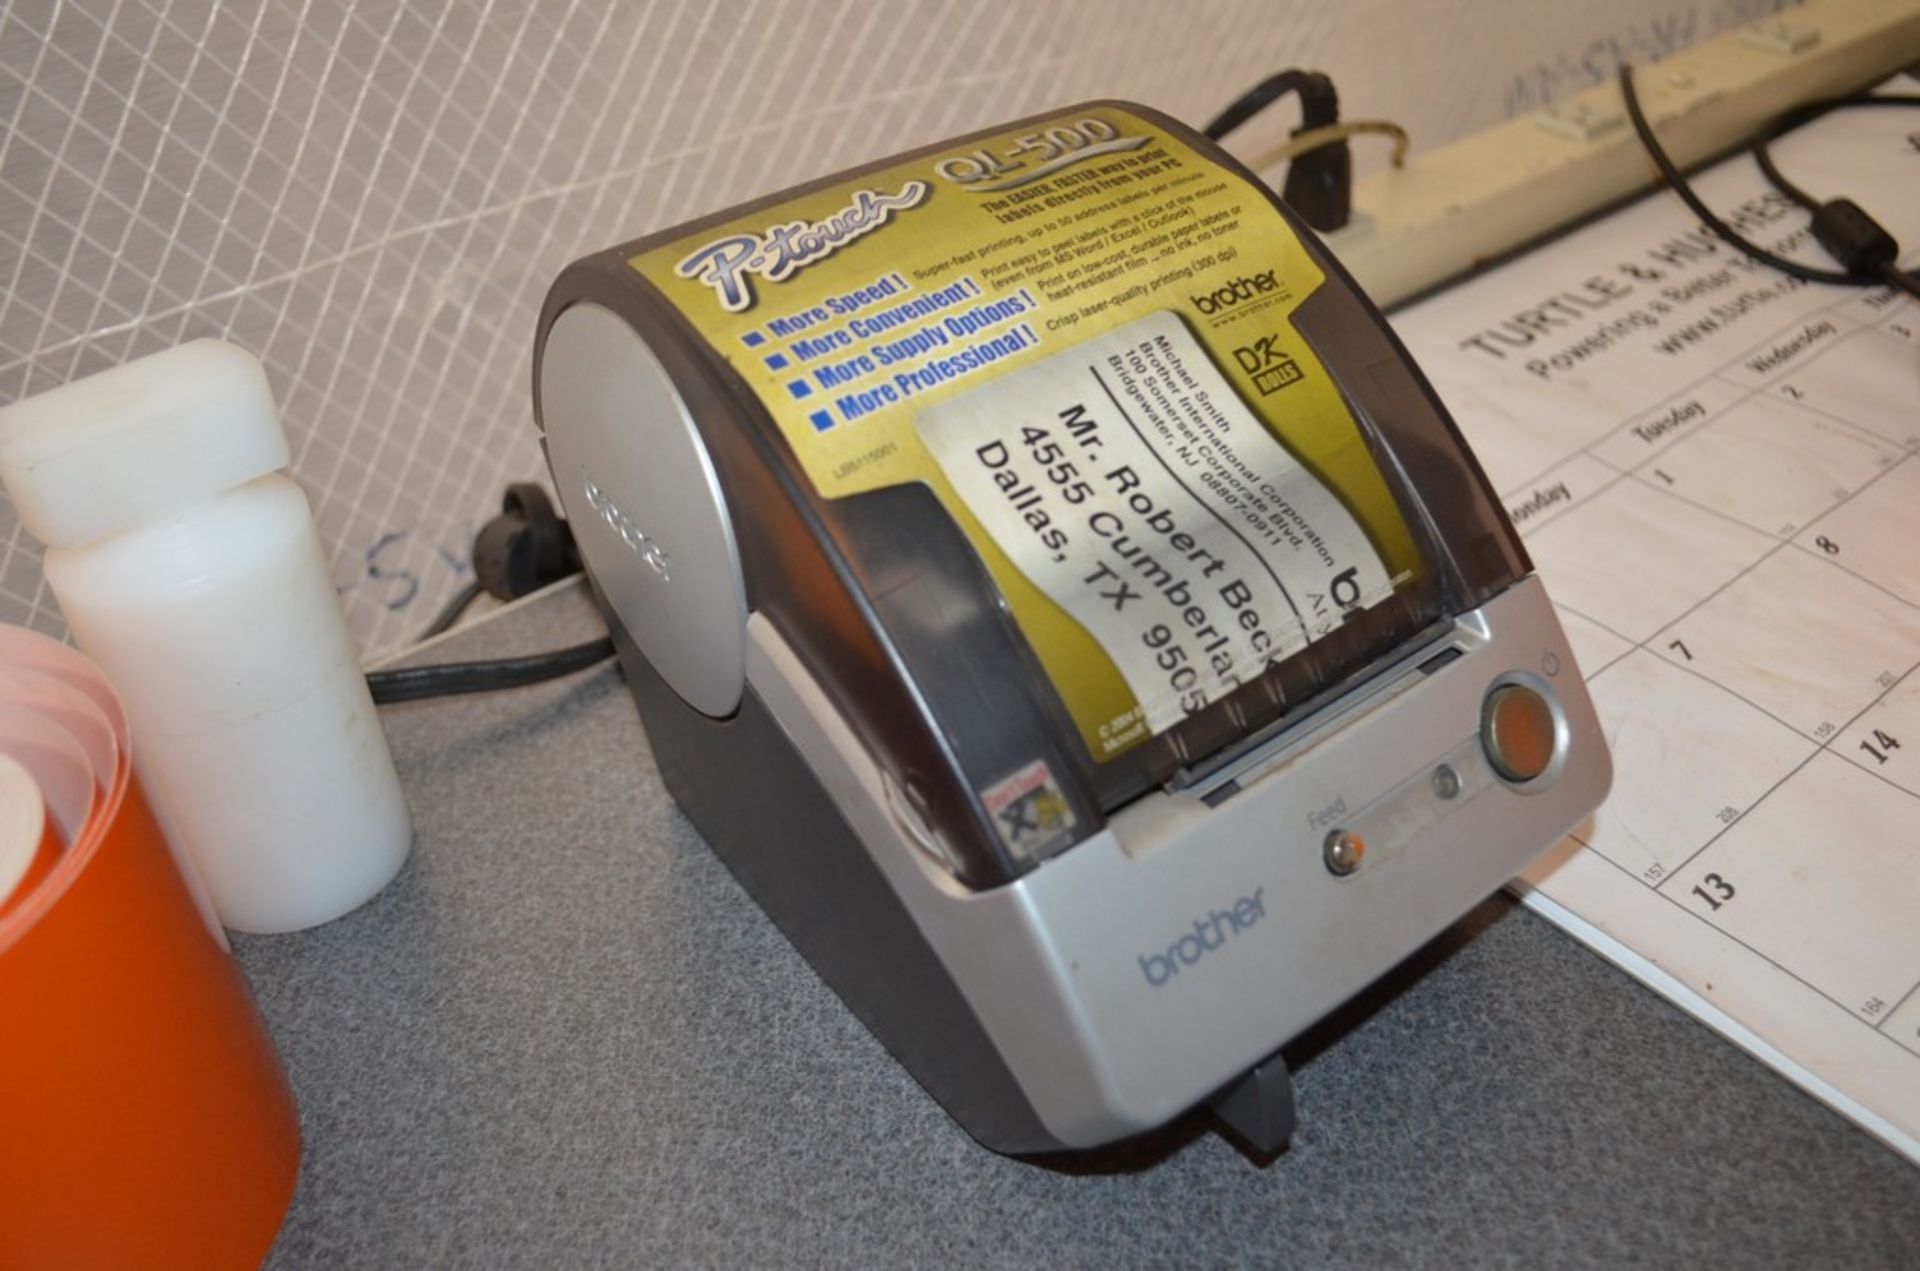 Lot - Table with Dura Label Pro and Brother P-Touch QL-500 Label Printer (No Laptop or Monitor); - Image 6 of 7